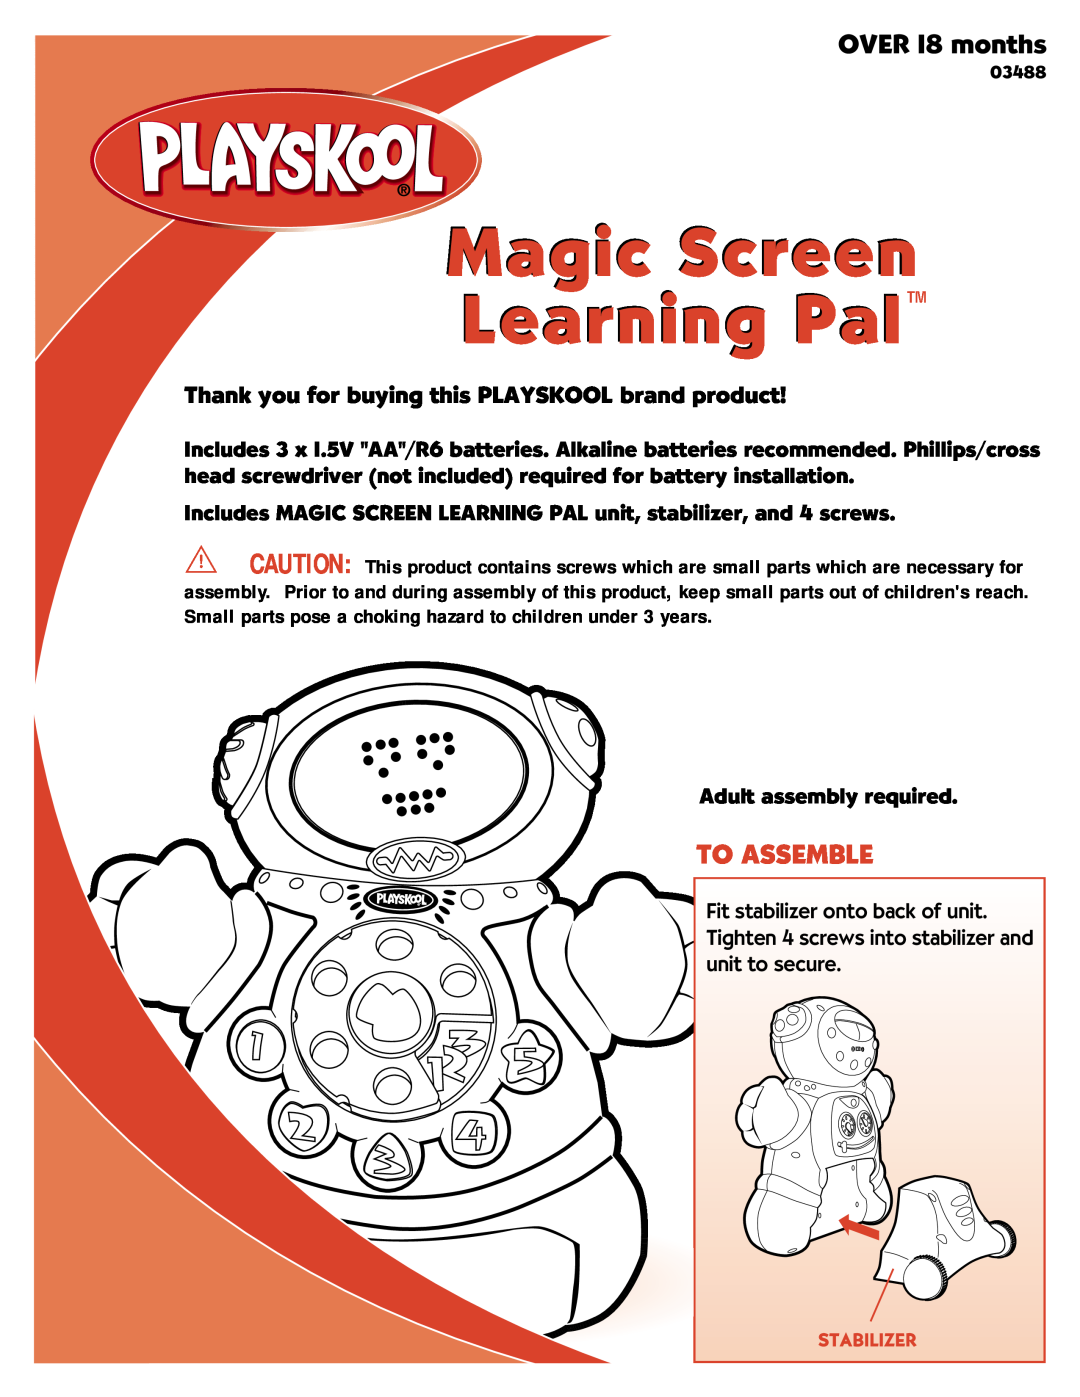 Hasbro 03488 manual To Assemble, Magic Screen Learning Pal, OVER 18 months 